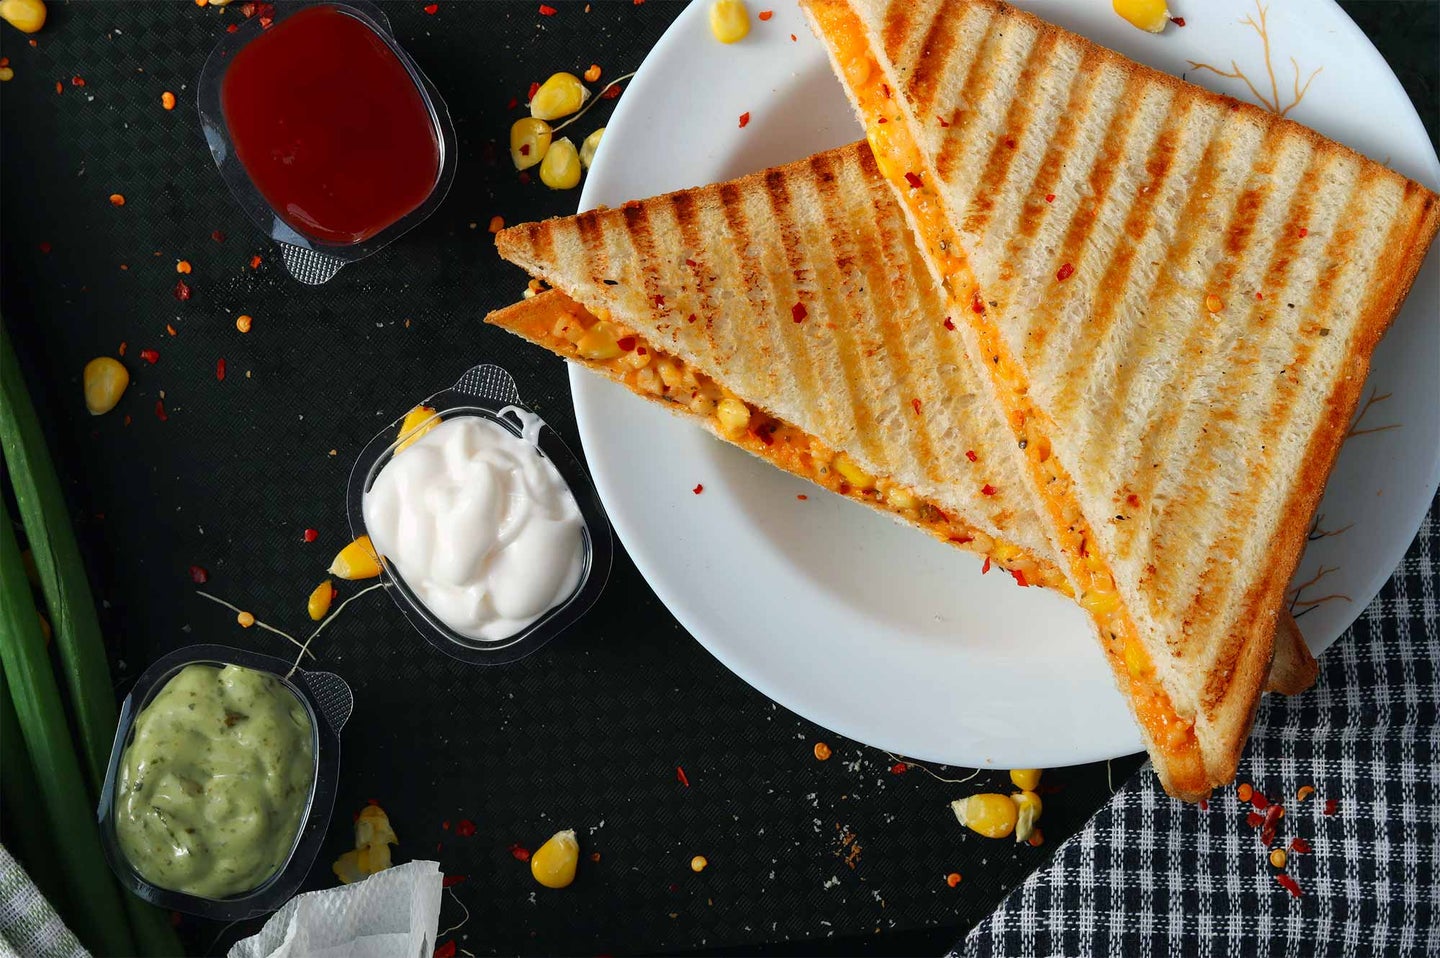 Pressed grilled cheese sandwich with grill marks